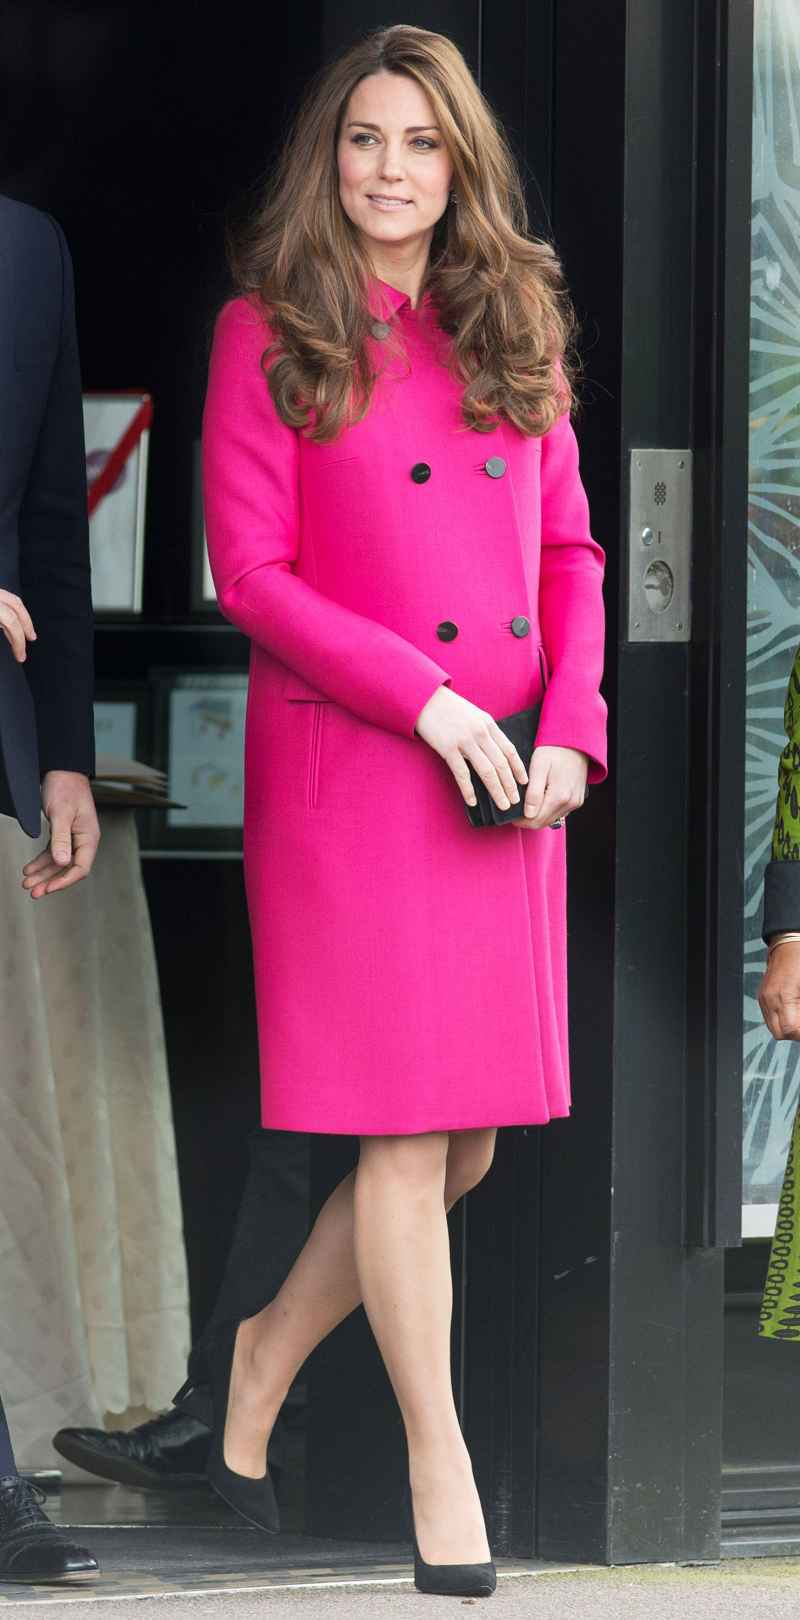 Kate Middleton's Style Evolution - March 2015